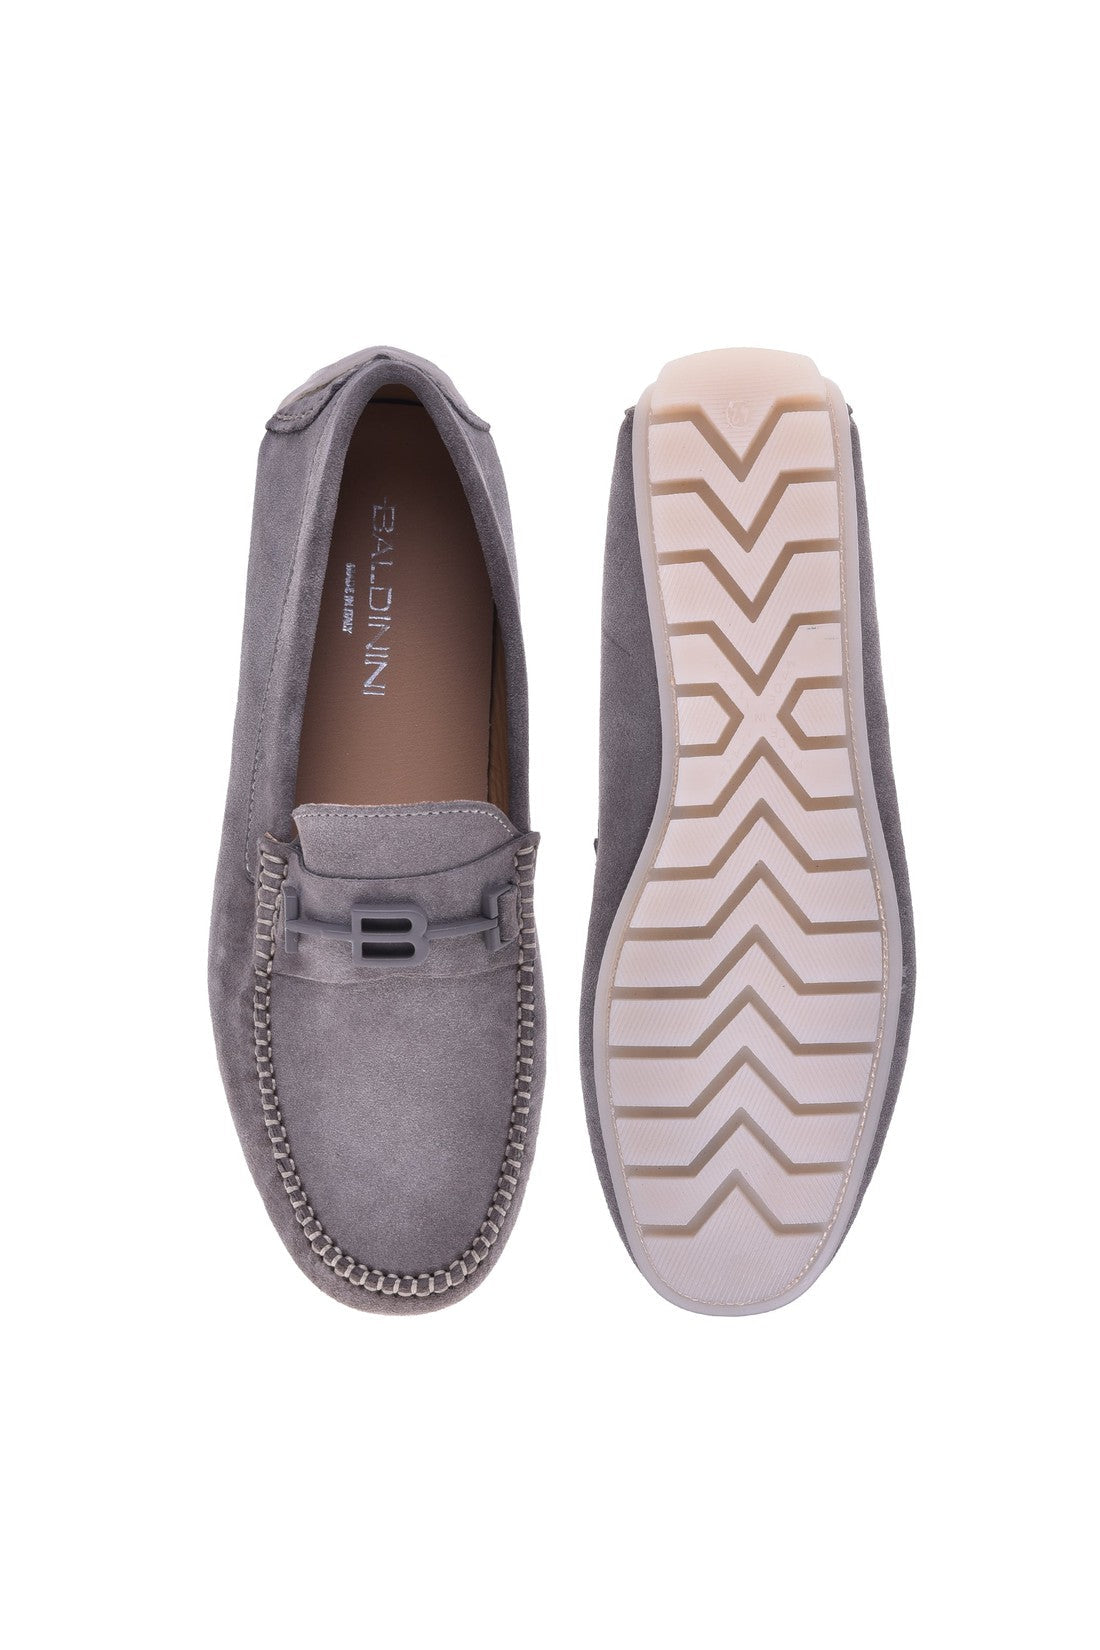 Loafer in grey suede leather